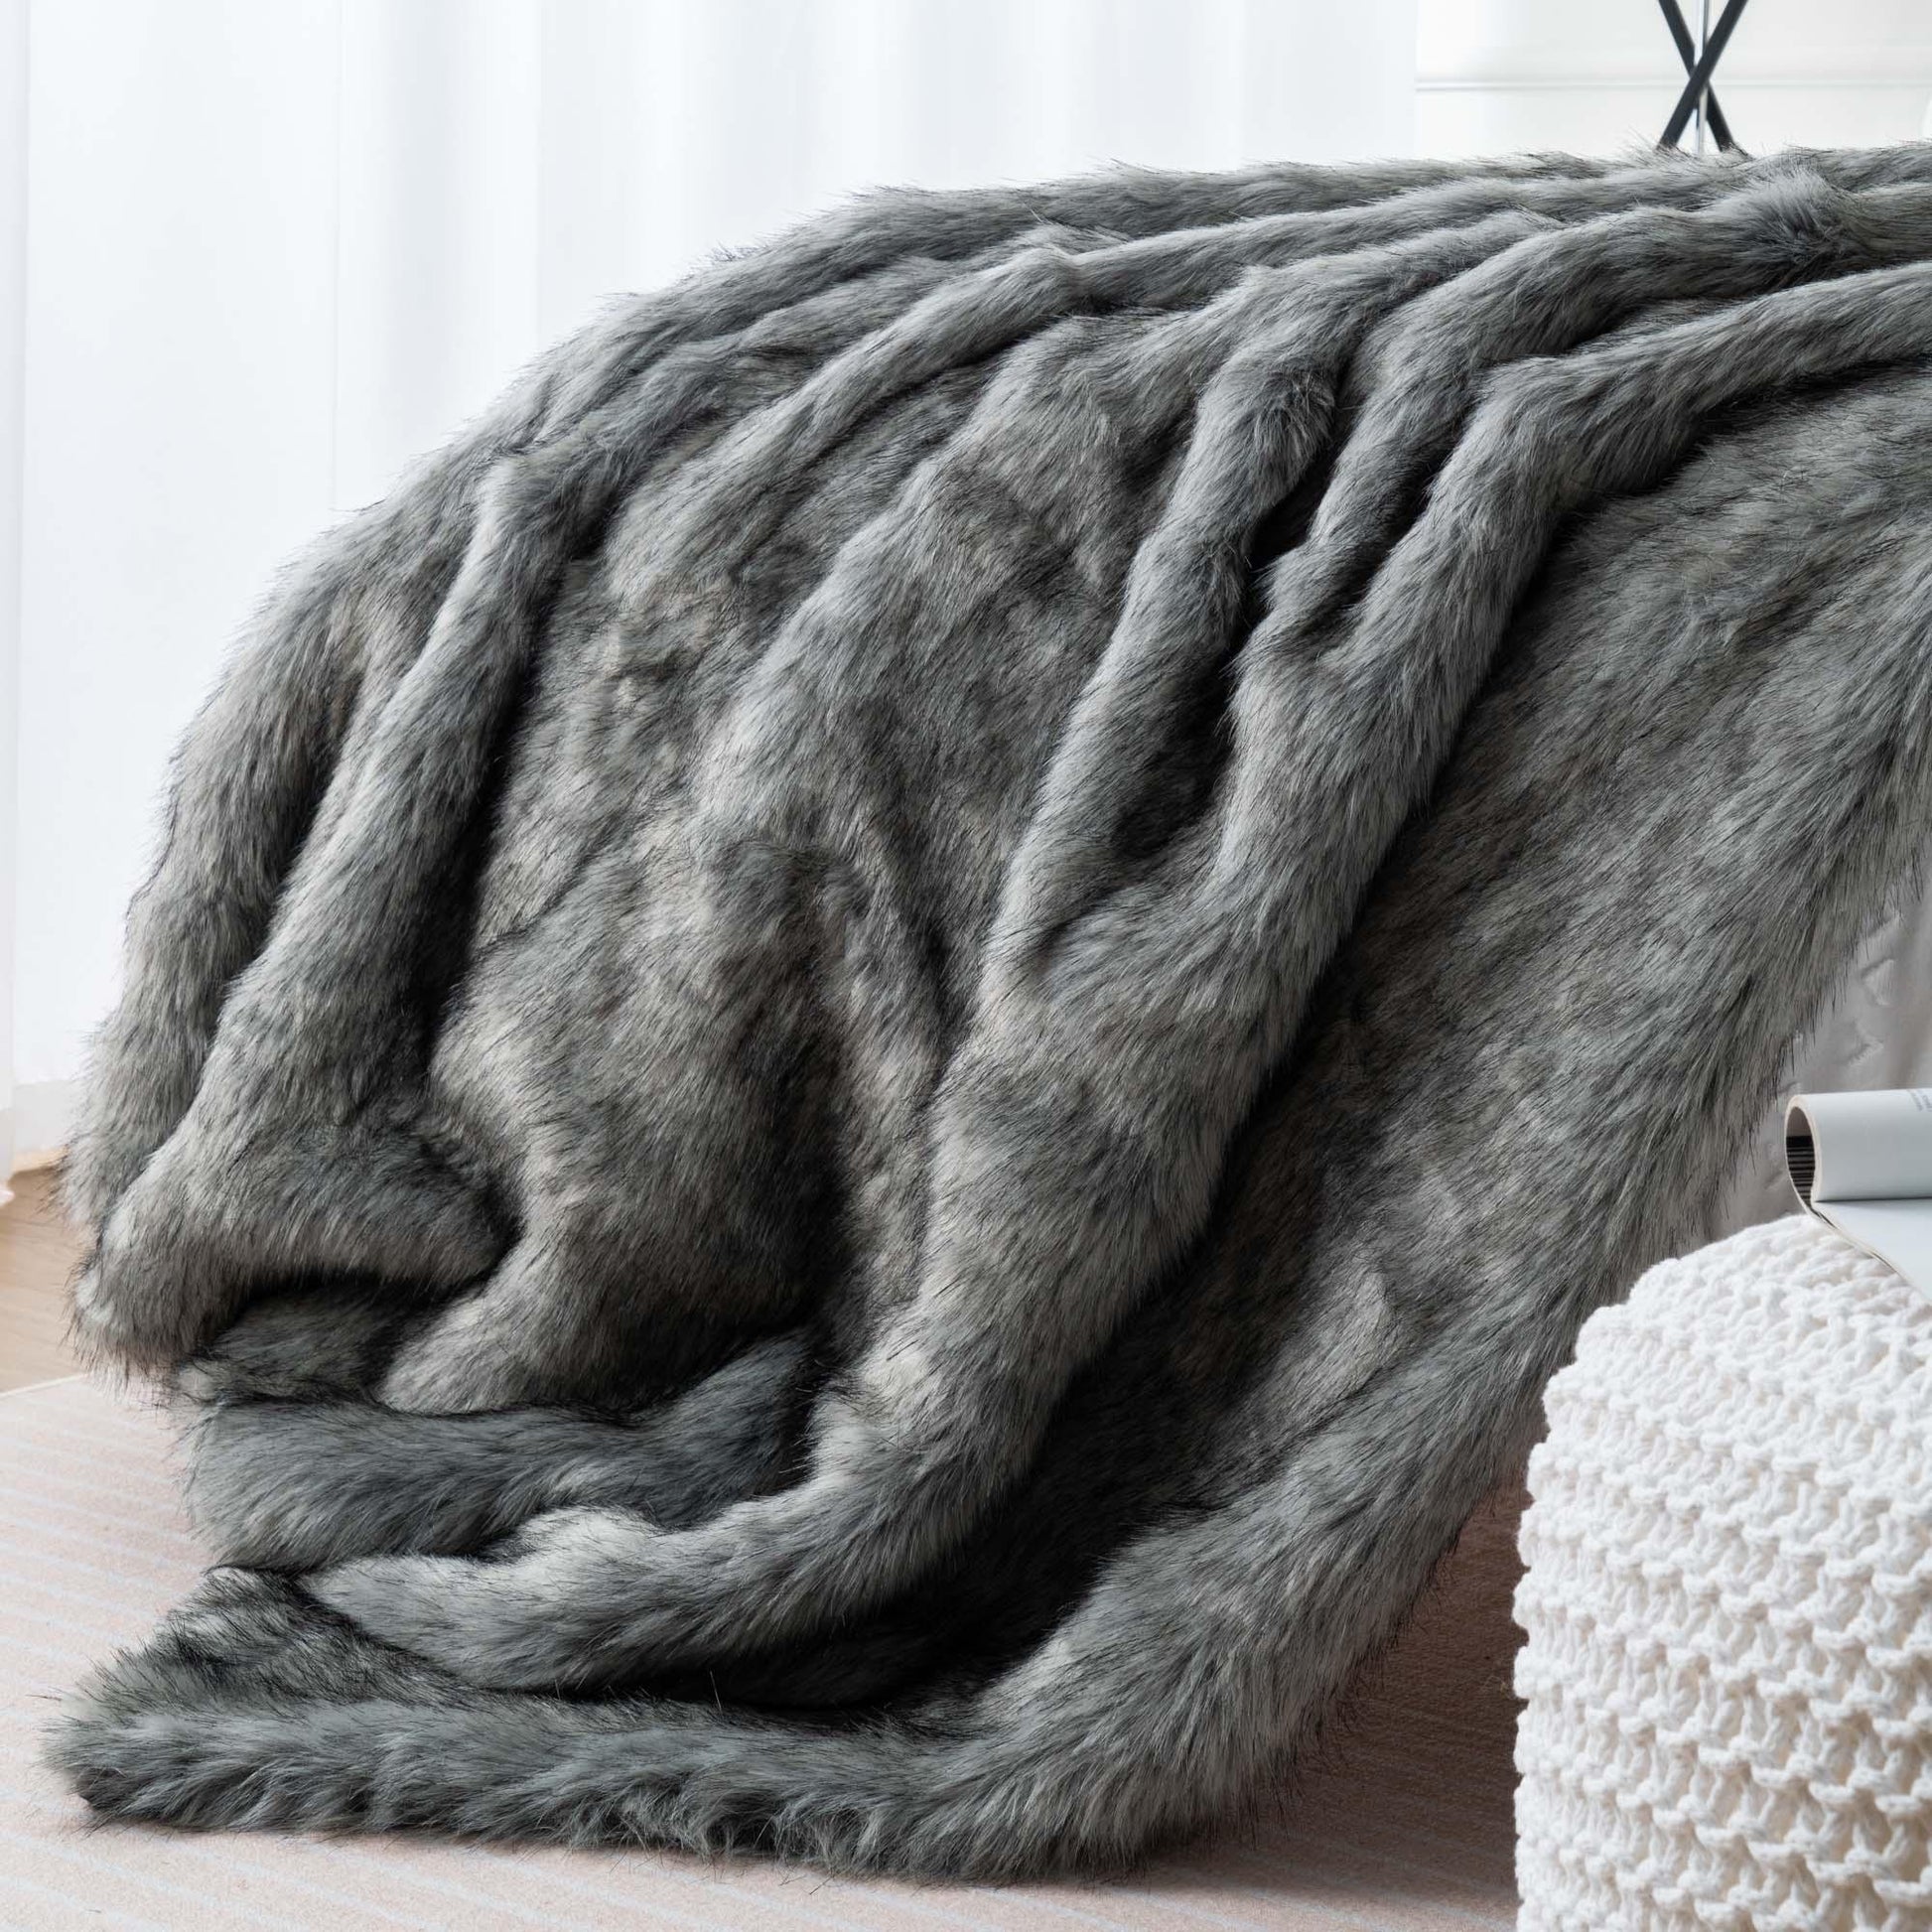  BATTILO HOME Luxury Black Faux Fur Throw Blanket, Large Cozy  Warm Fluffy Fur Blanket for Bed,Couch, Sofa, Chair, Black Fur Throws with  Long Pile, 60x80 : Home & Kitchen